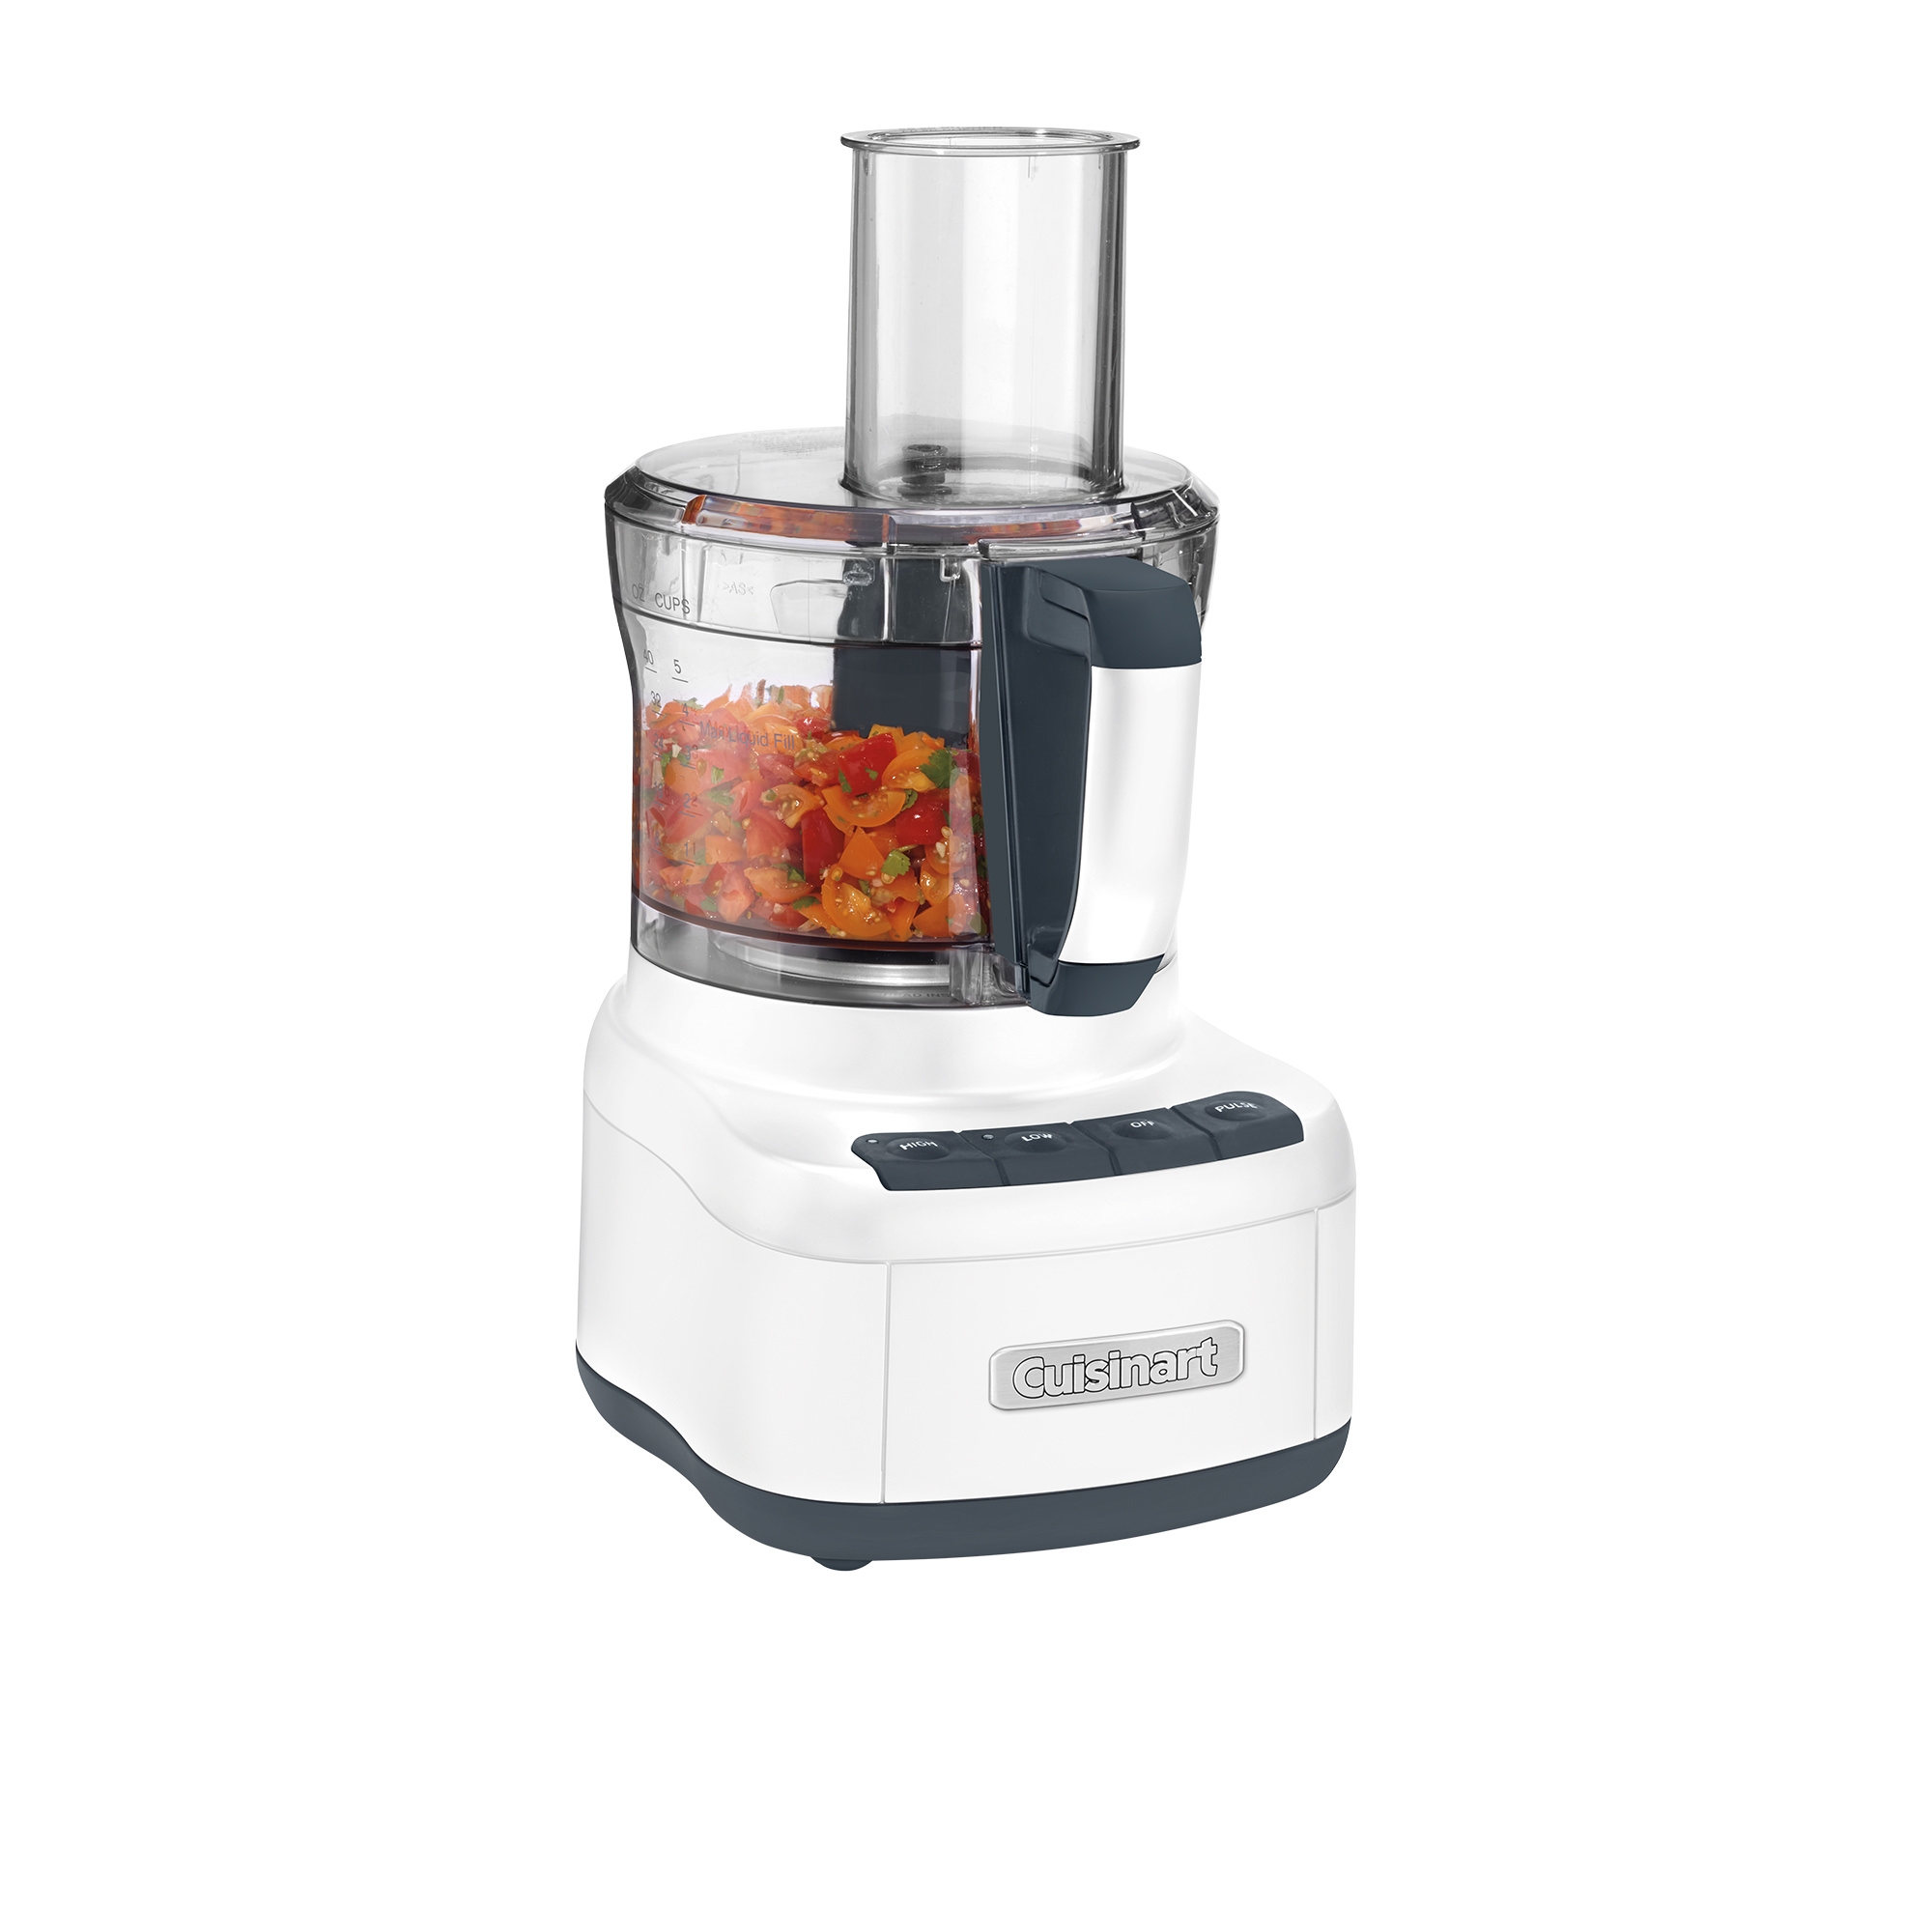 Cuisinart Food Processor 8 Cup White Image 2